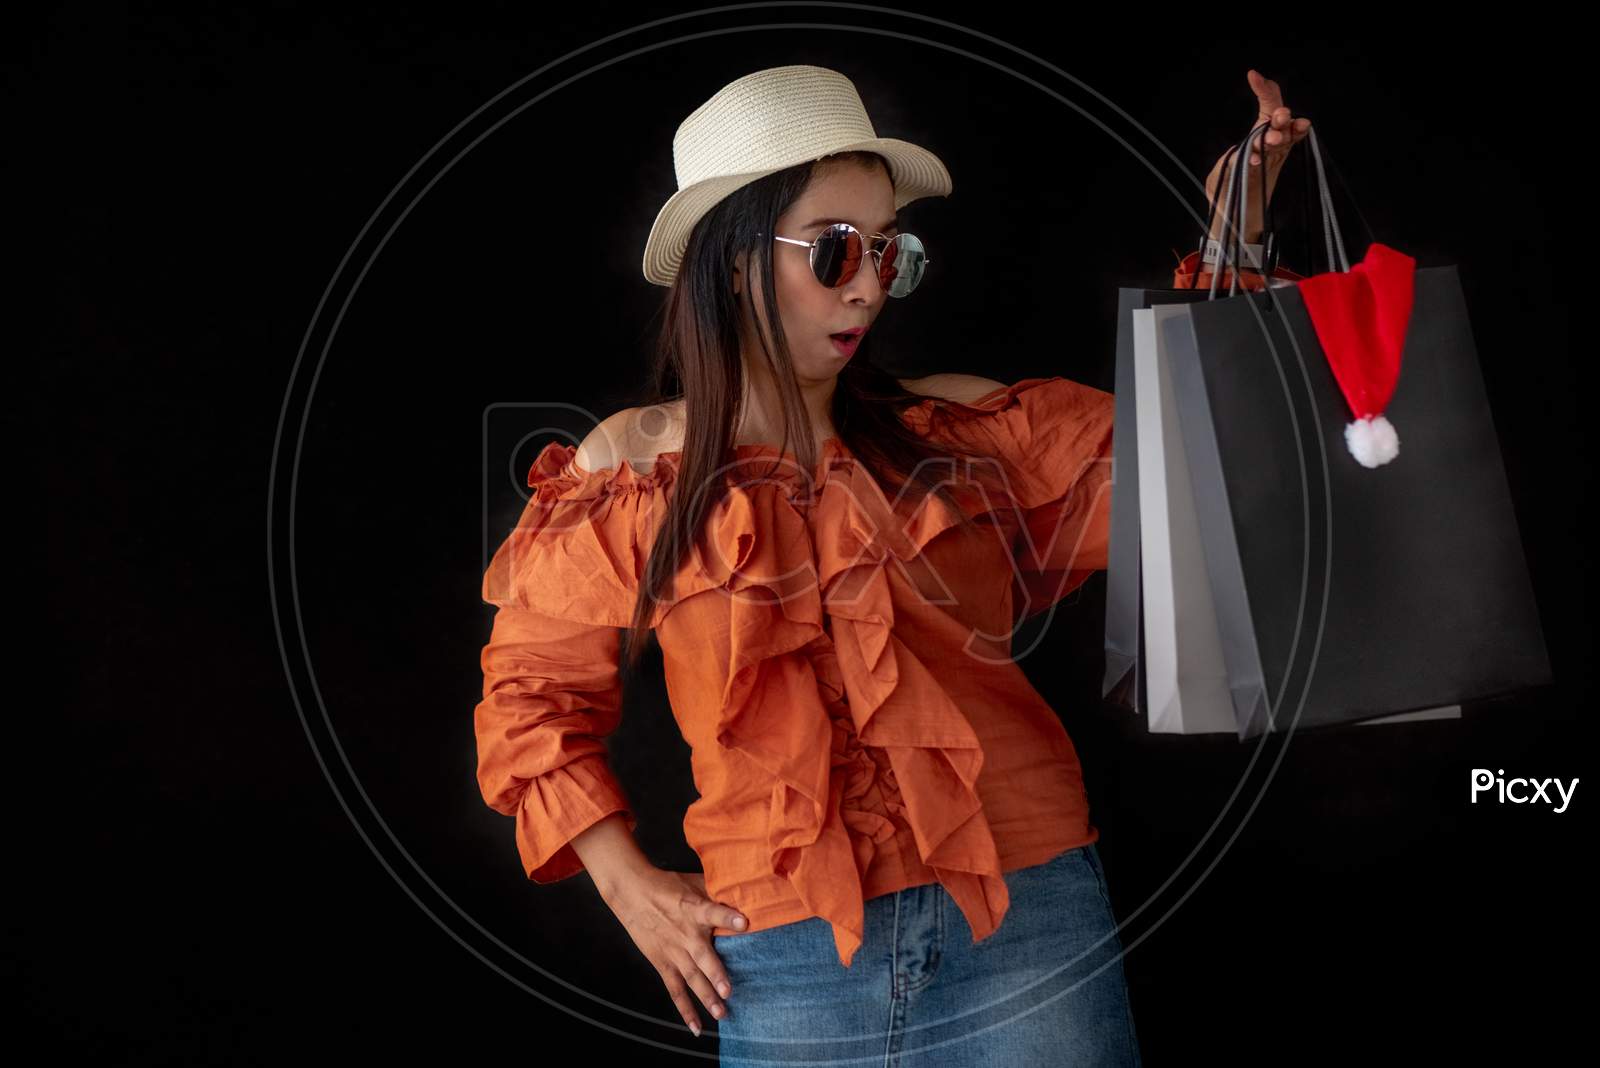 Asian Shopping Woman Surprised With Black Friday Shopping Bag And Santa Claus Hat Inside On Black Background. Shopaholics And Beauty Fashion Theme.